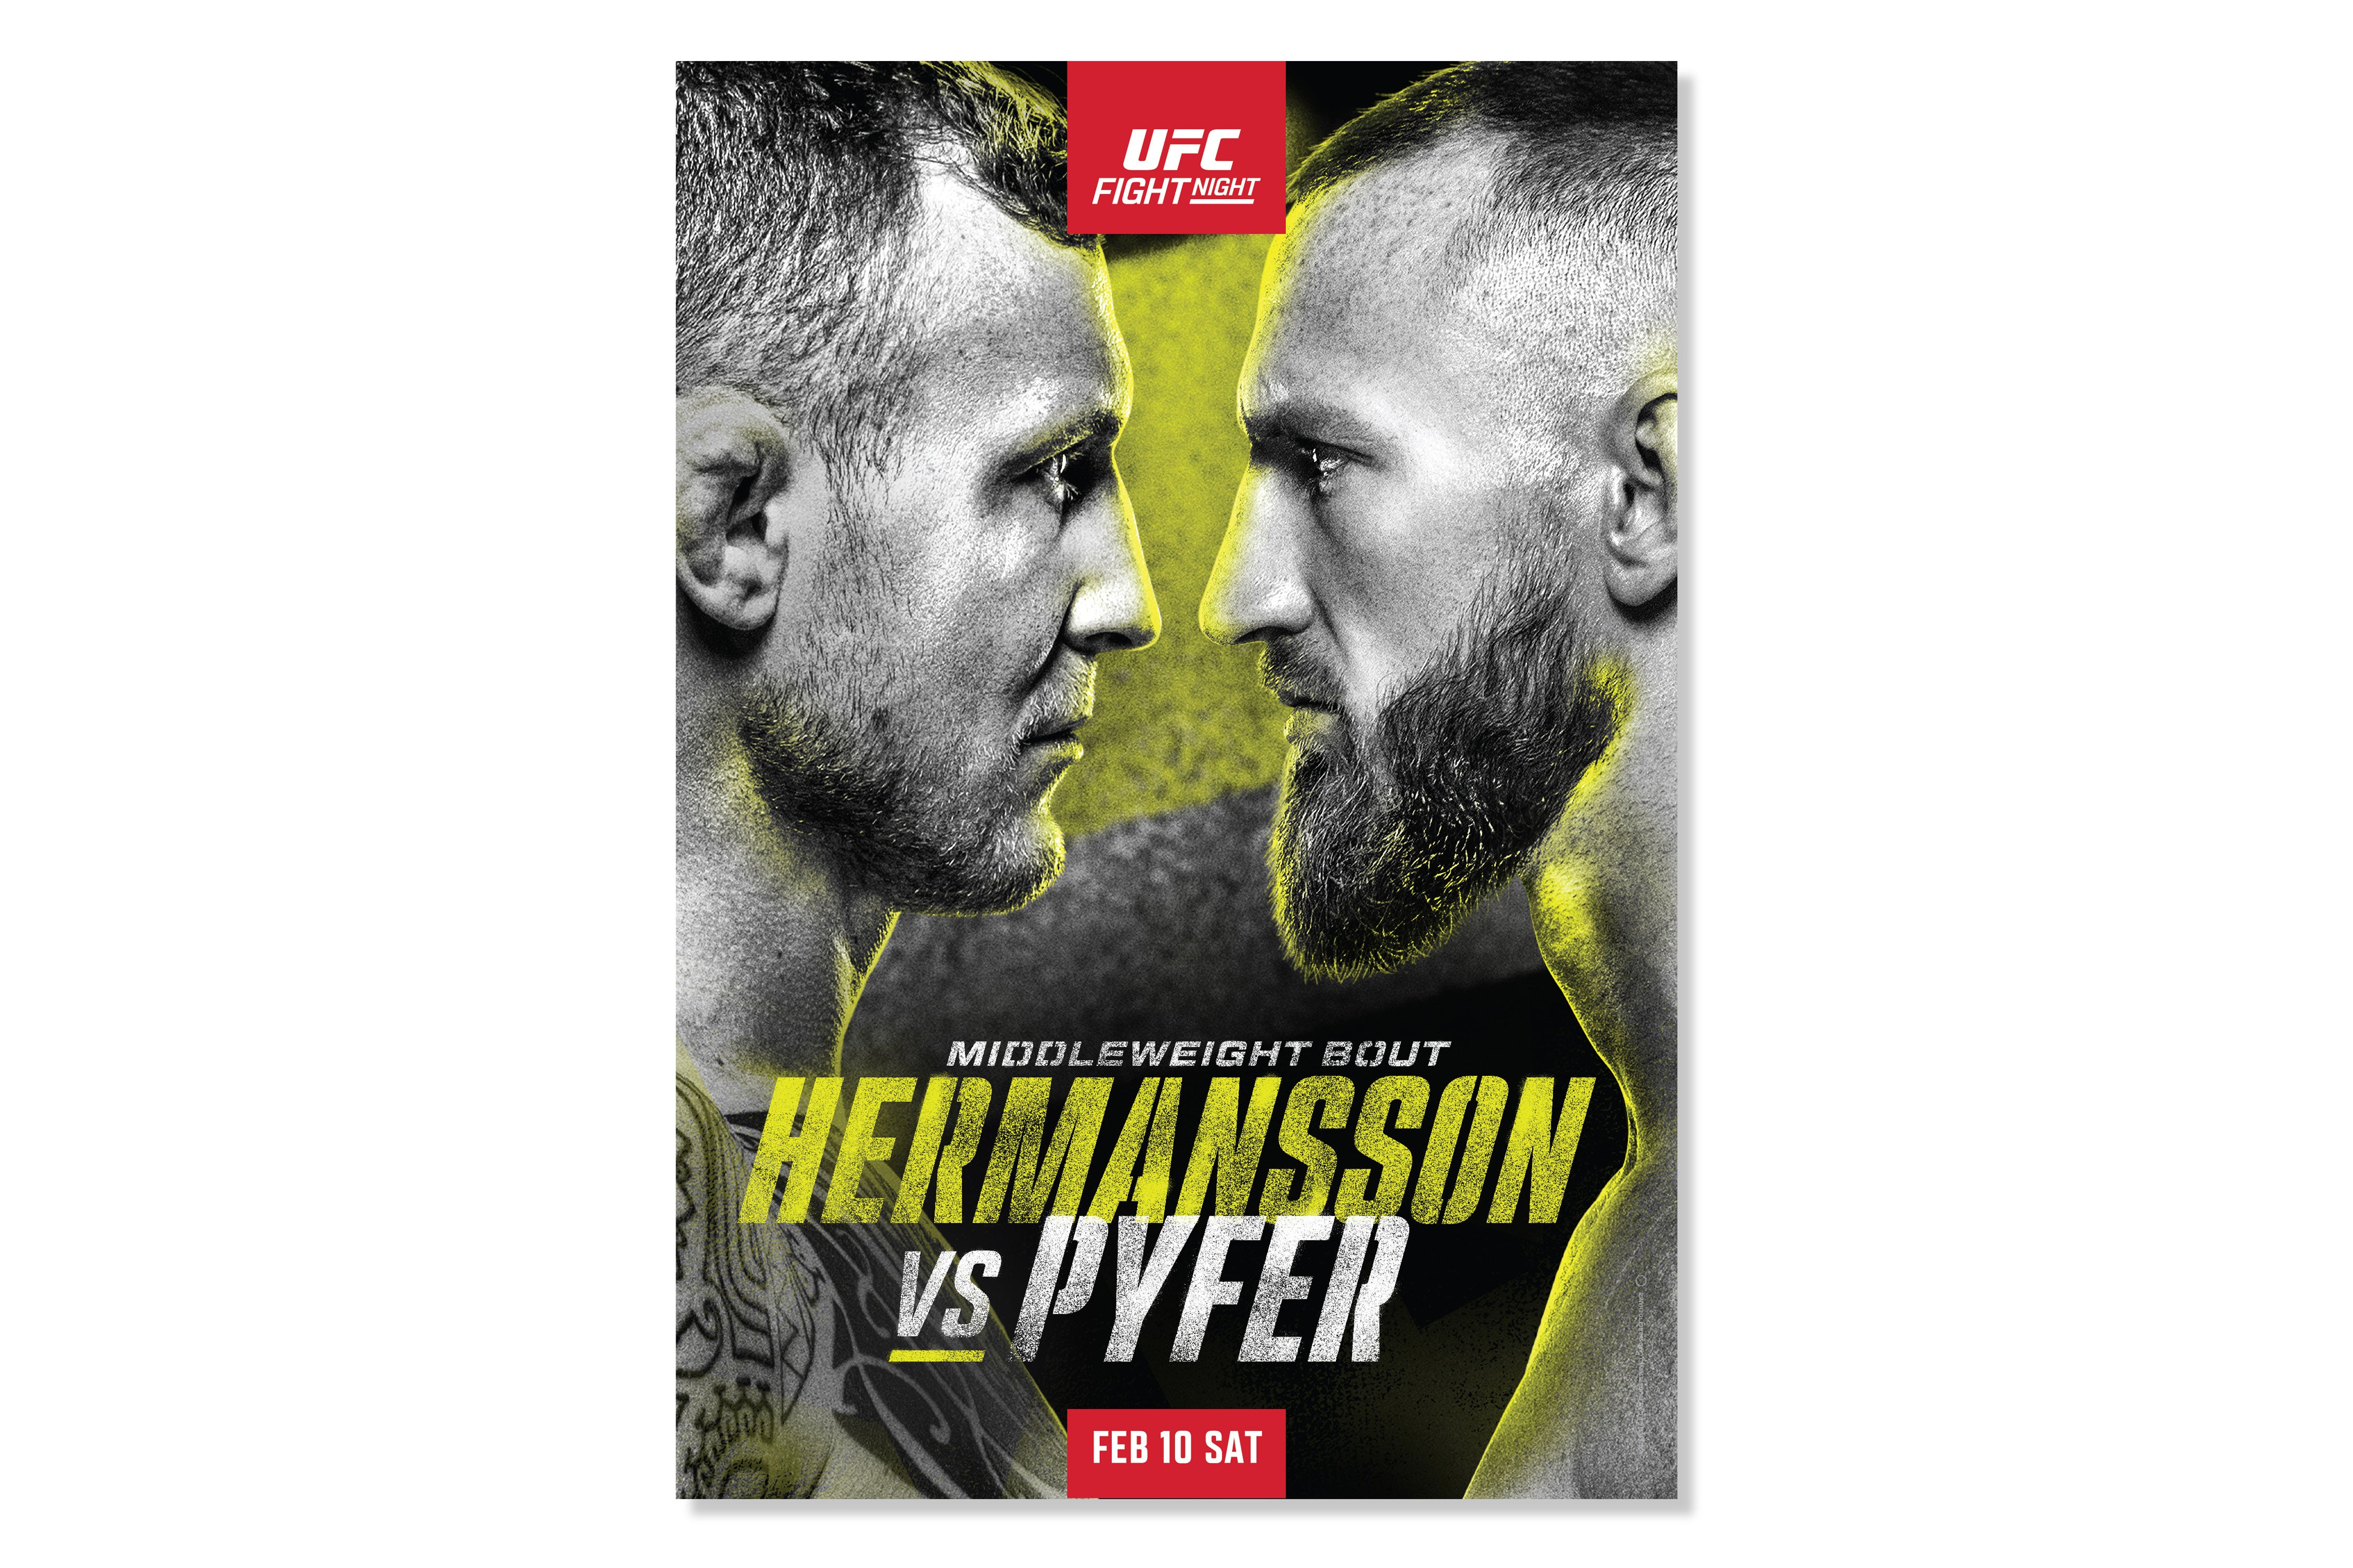 UFC Fight Night: Hermansson vs Pyfer Autographed Event Poster